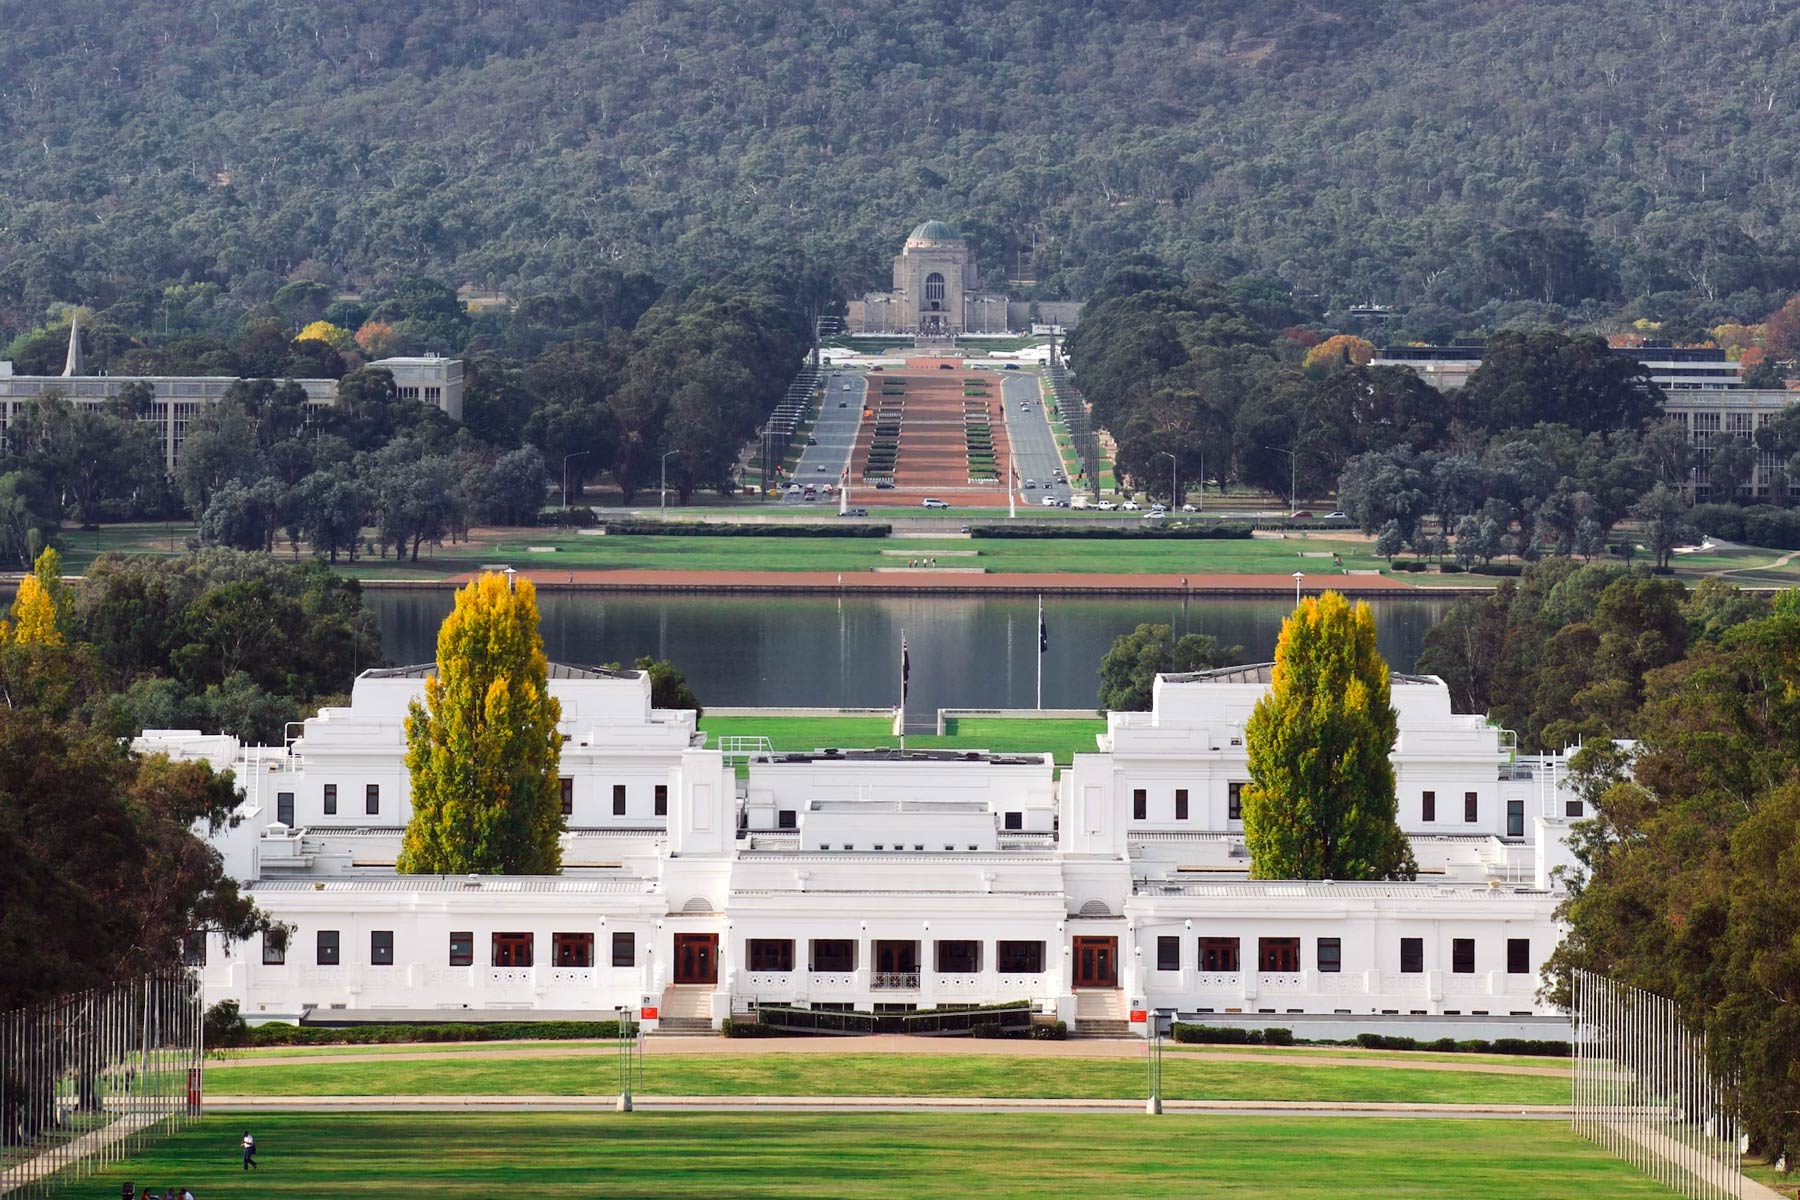 The view from the Old Parliament House to the Australian War Memorial